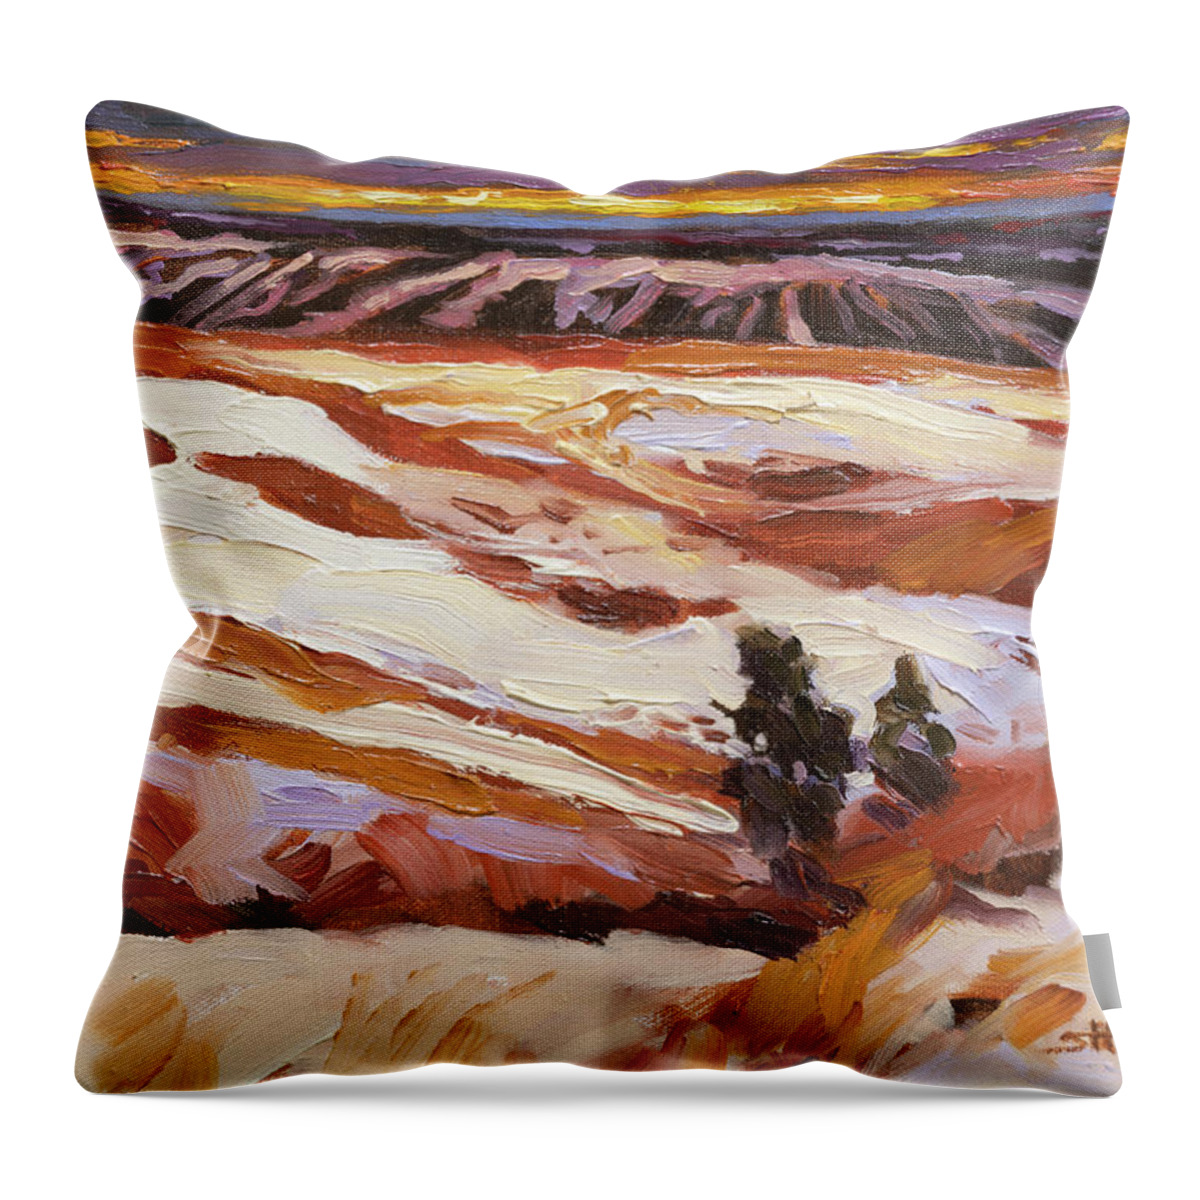 Landscape Throw Pillow featuring the painting High Country Thaw by Steve Henderson